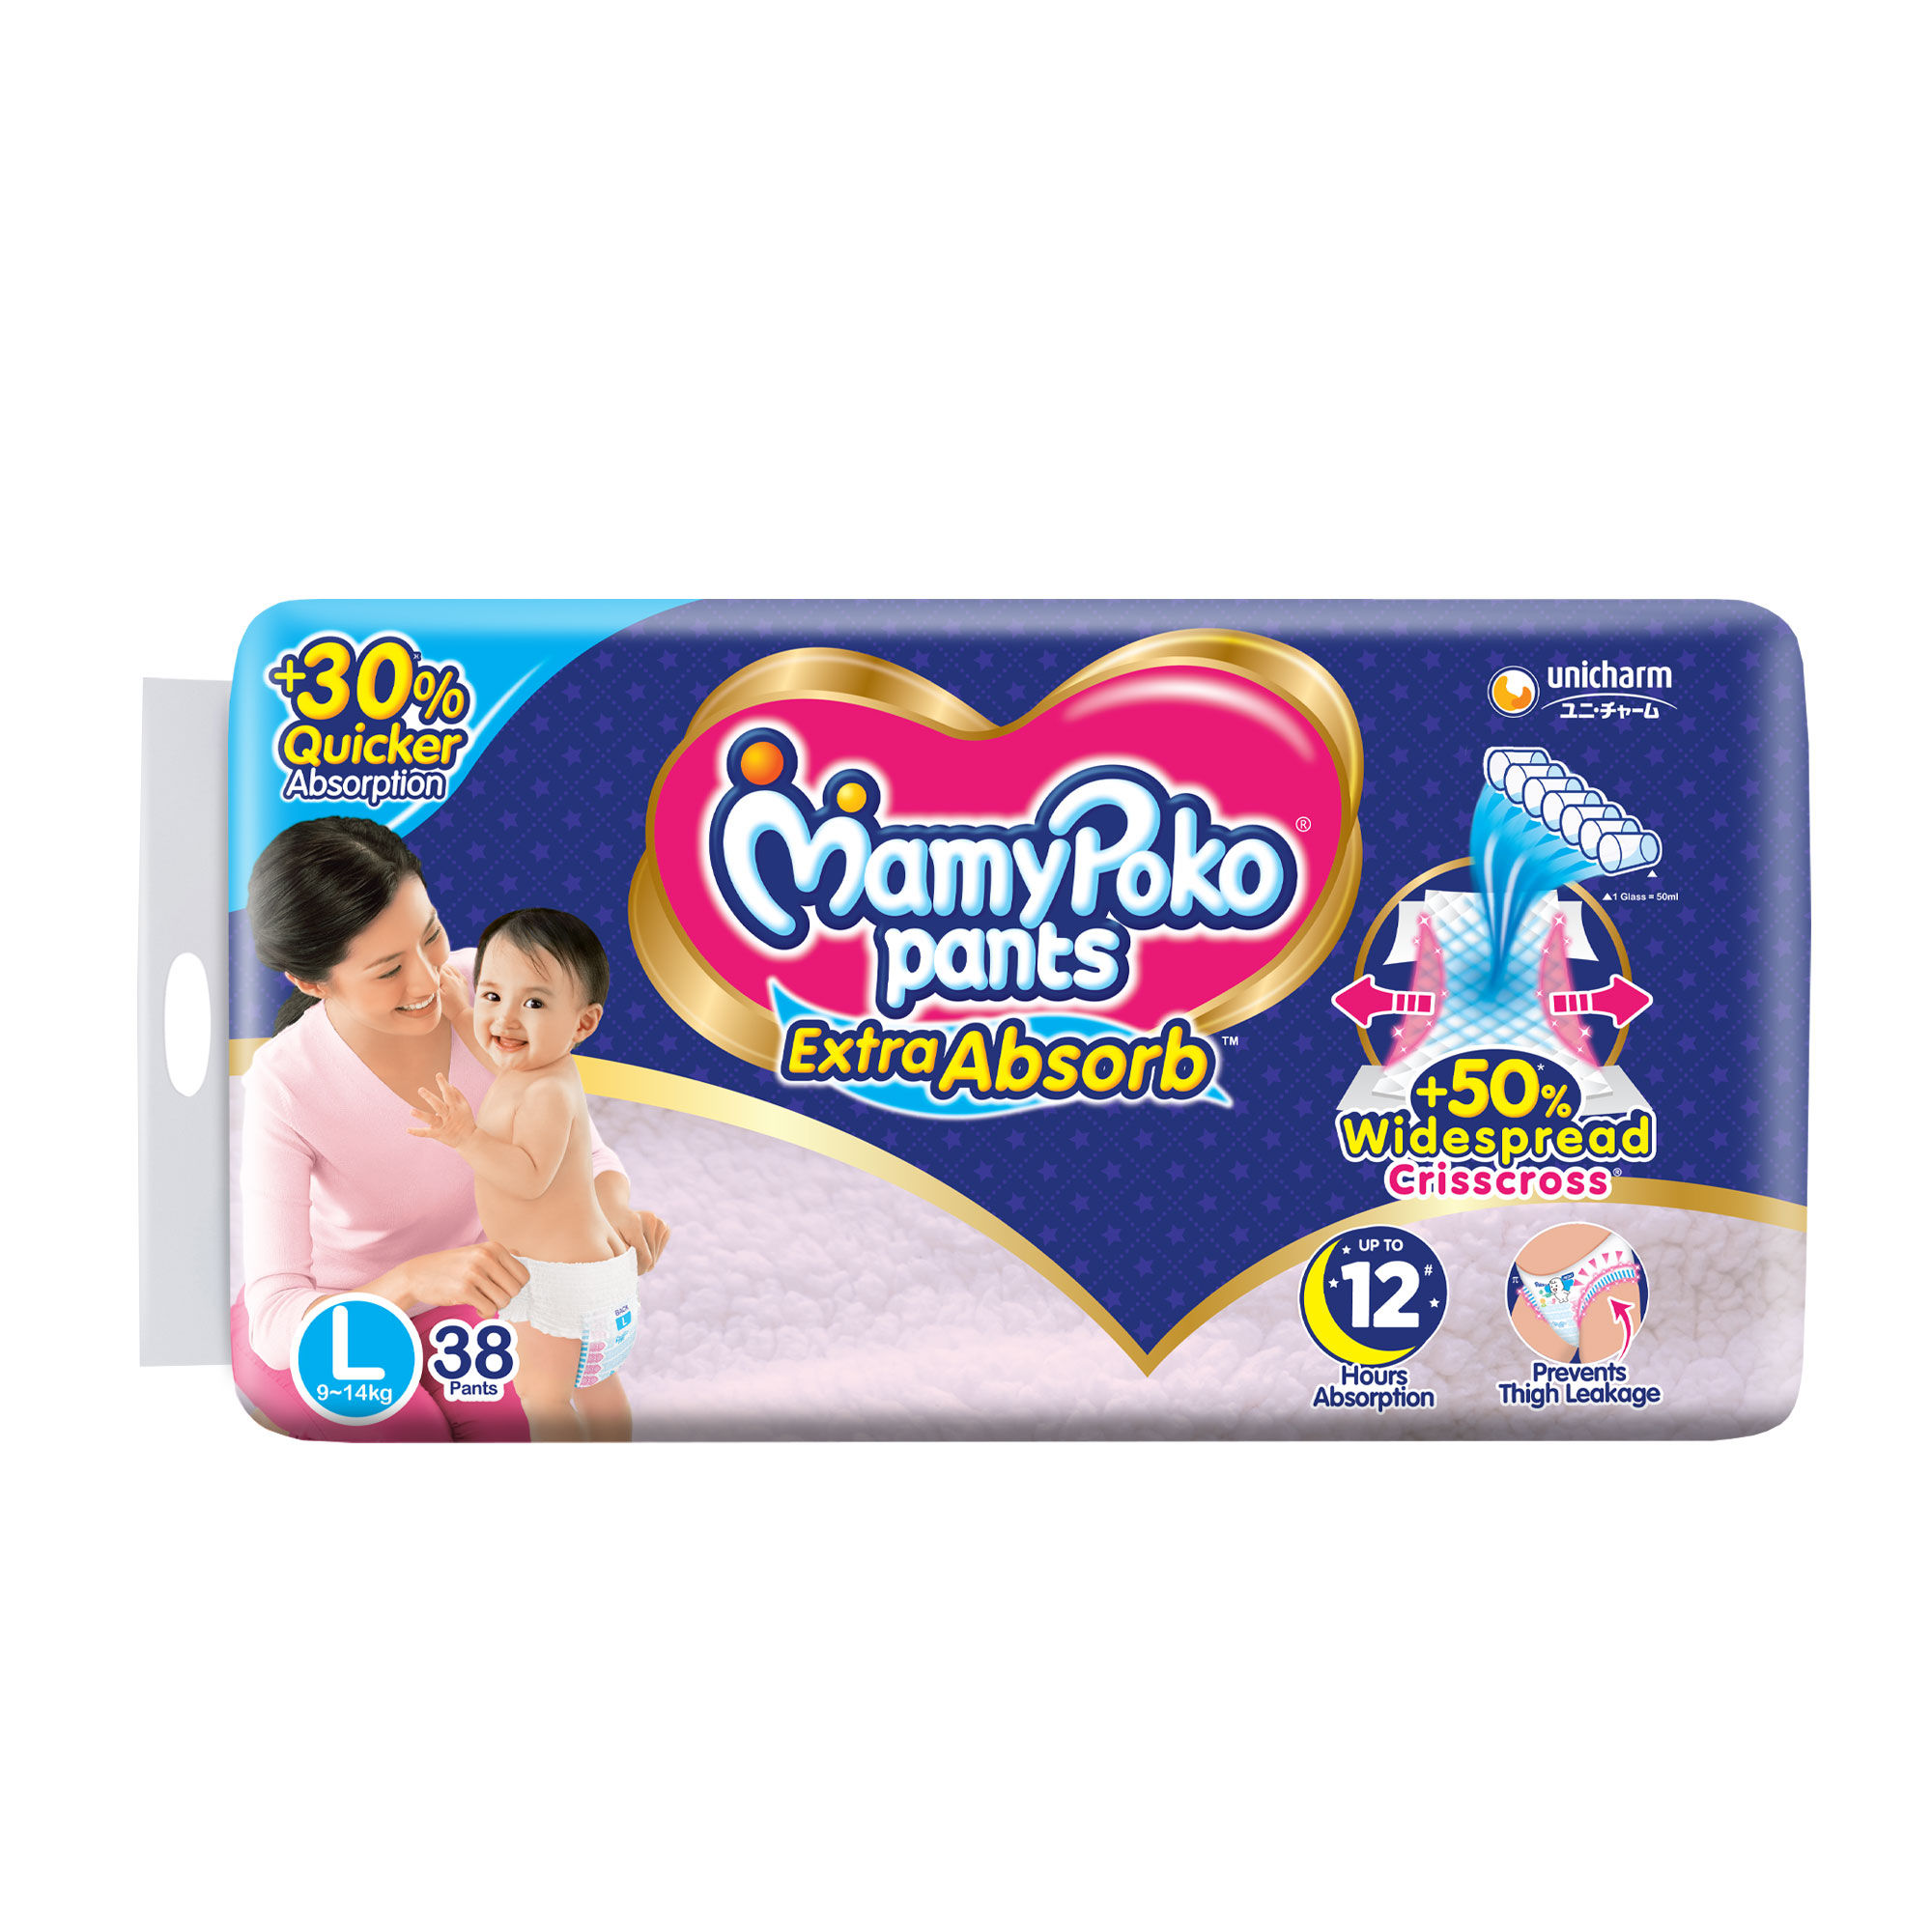 Mamy Poko Pants Large Size 914 kg Diapers 7 pc  Quick Pantry